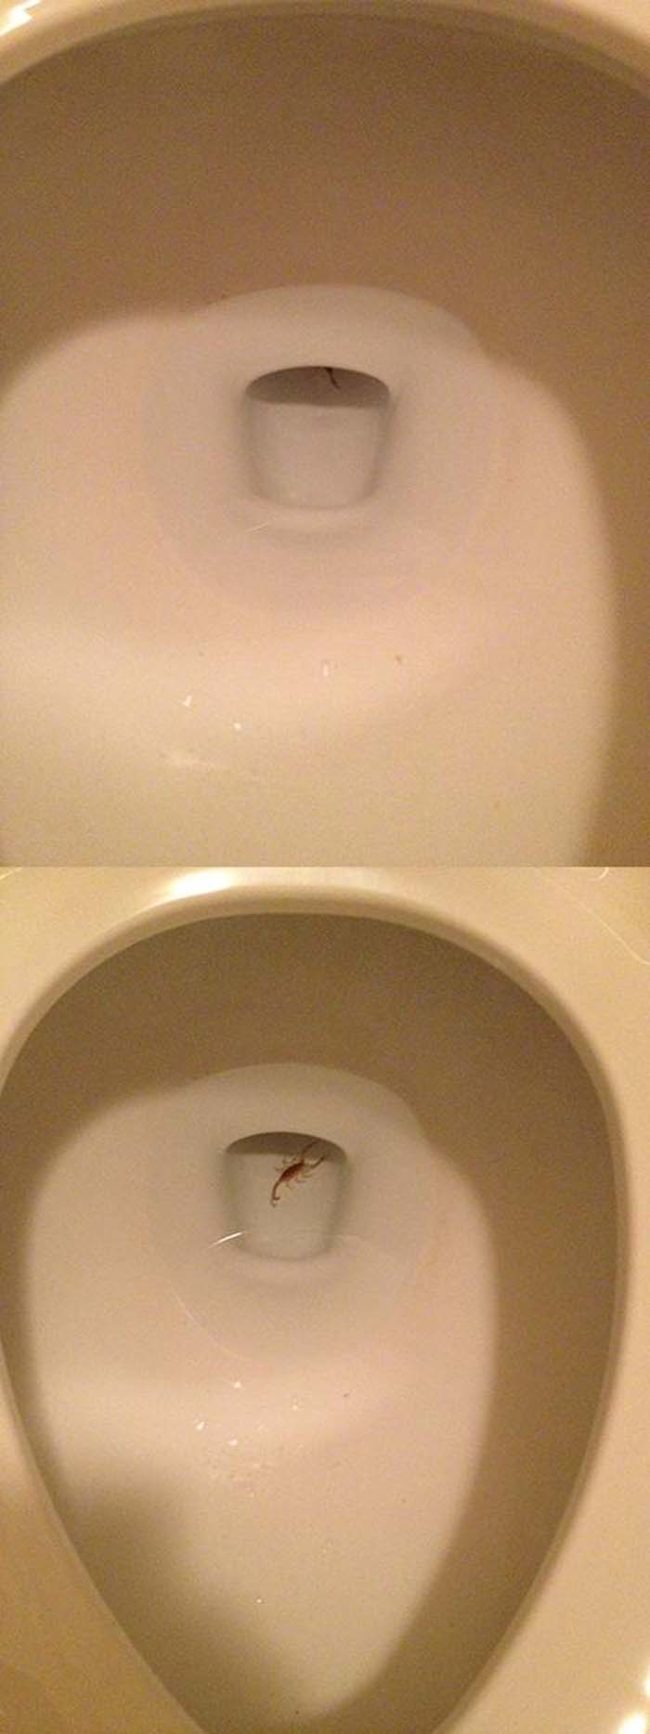 Be careful when using the bathroom in Arizona. You never know what's already living in that bowl.